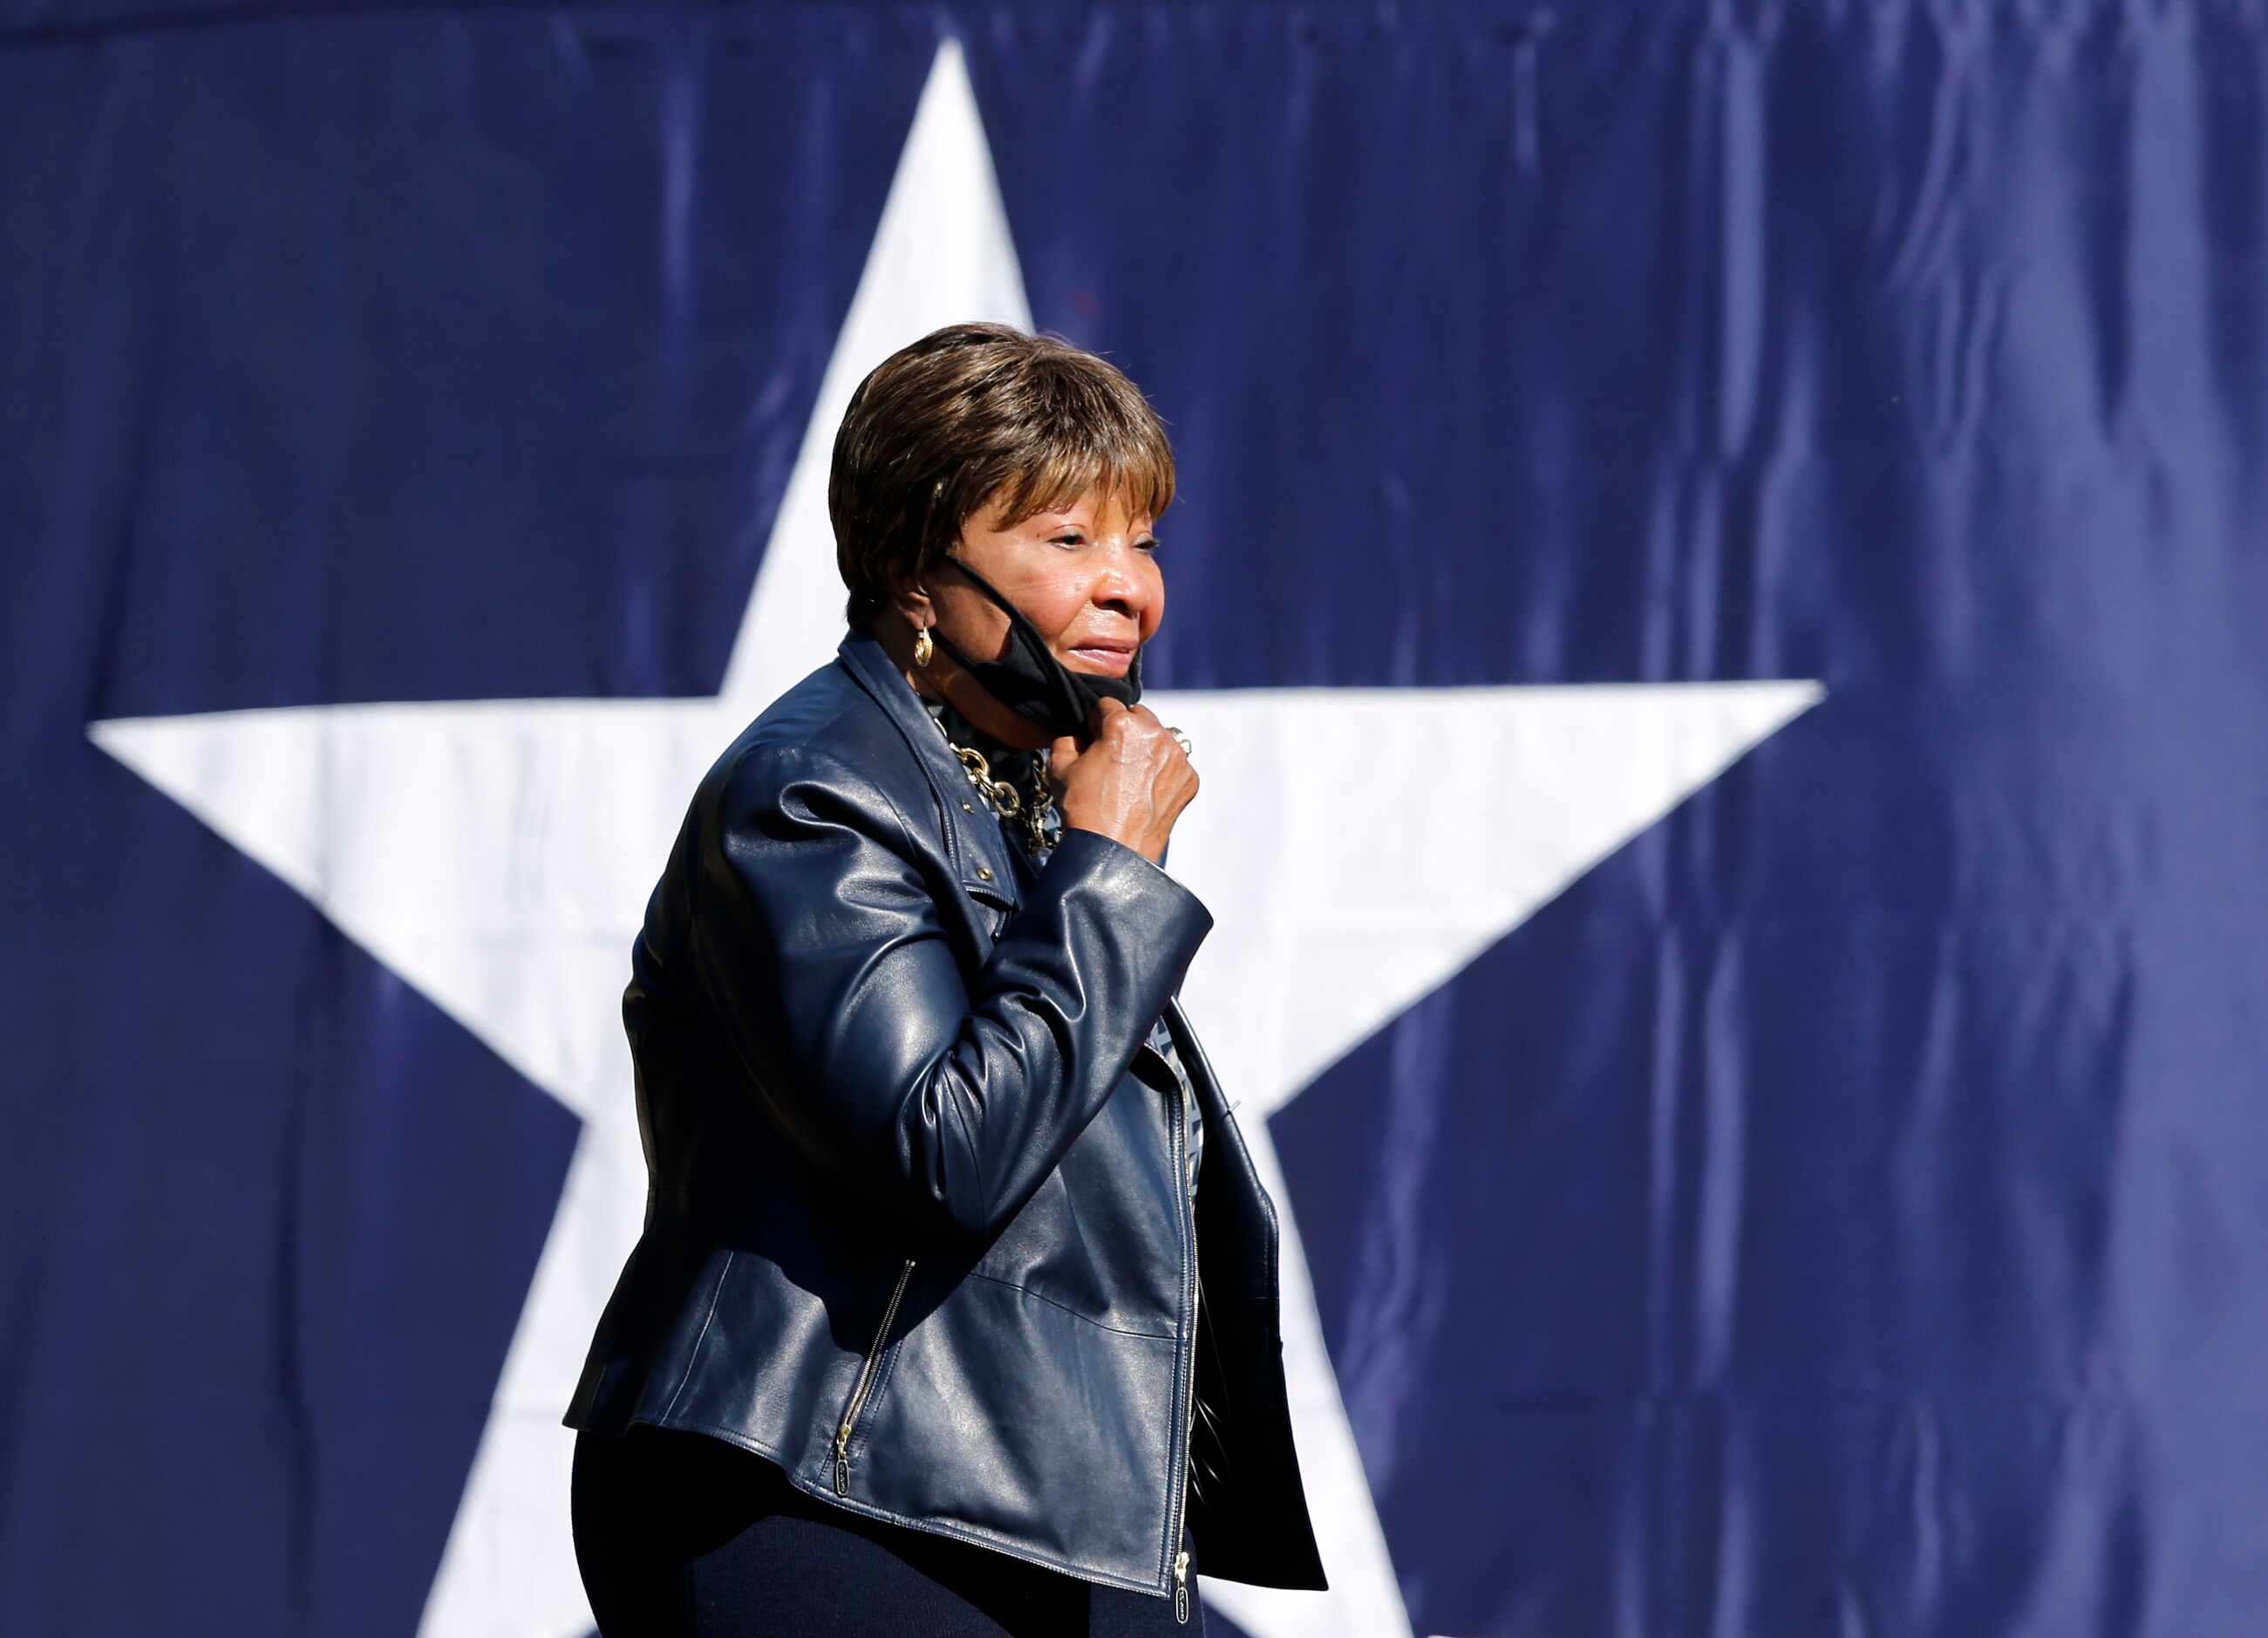 Eddie Bernice Johnson, the U.S. Representative from Texas' 30th District, takes off her mask...